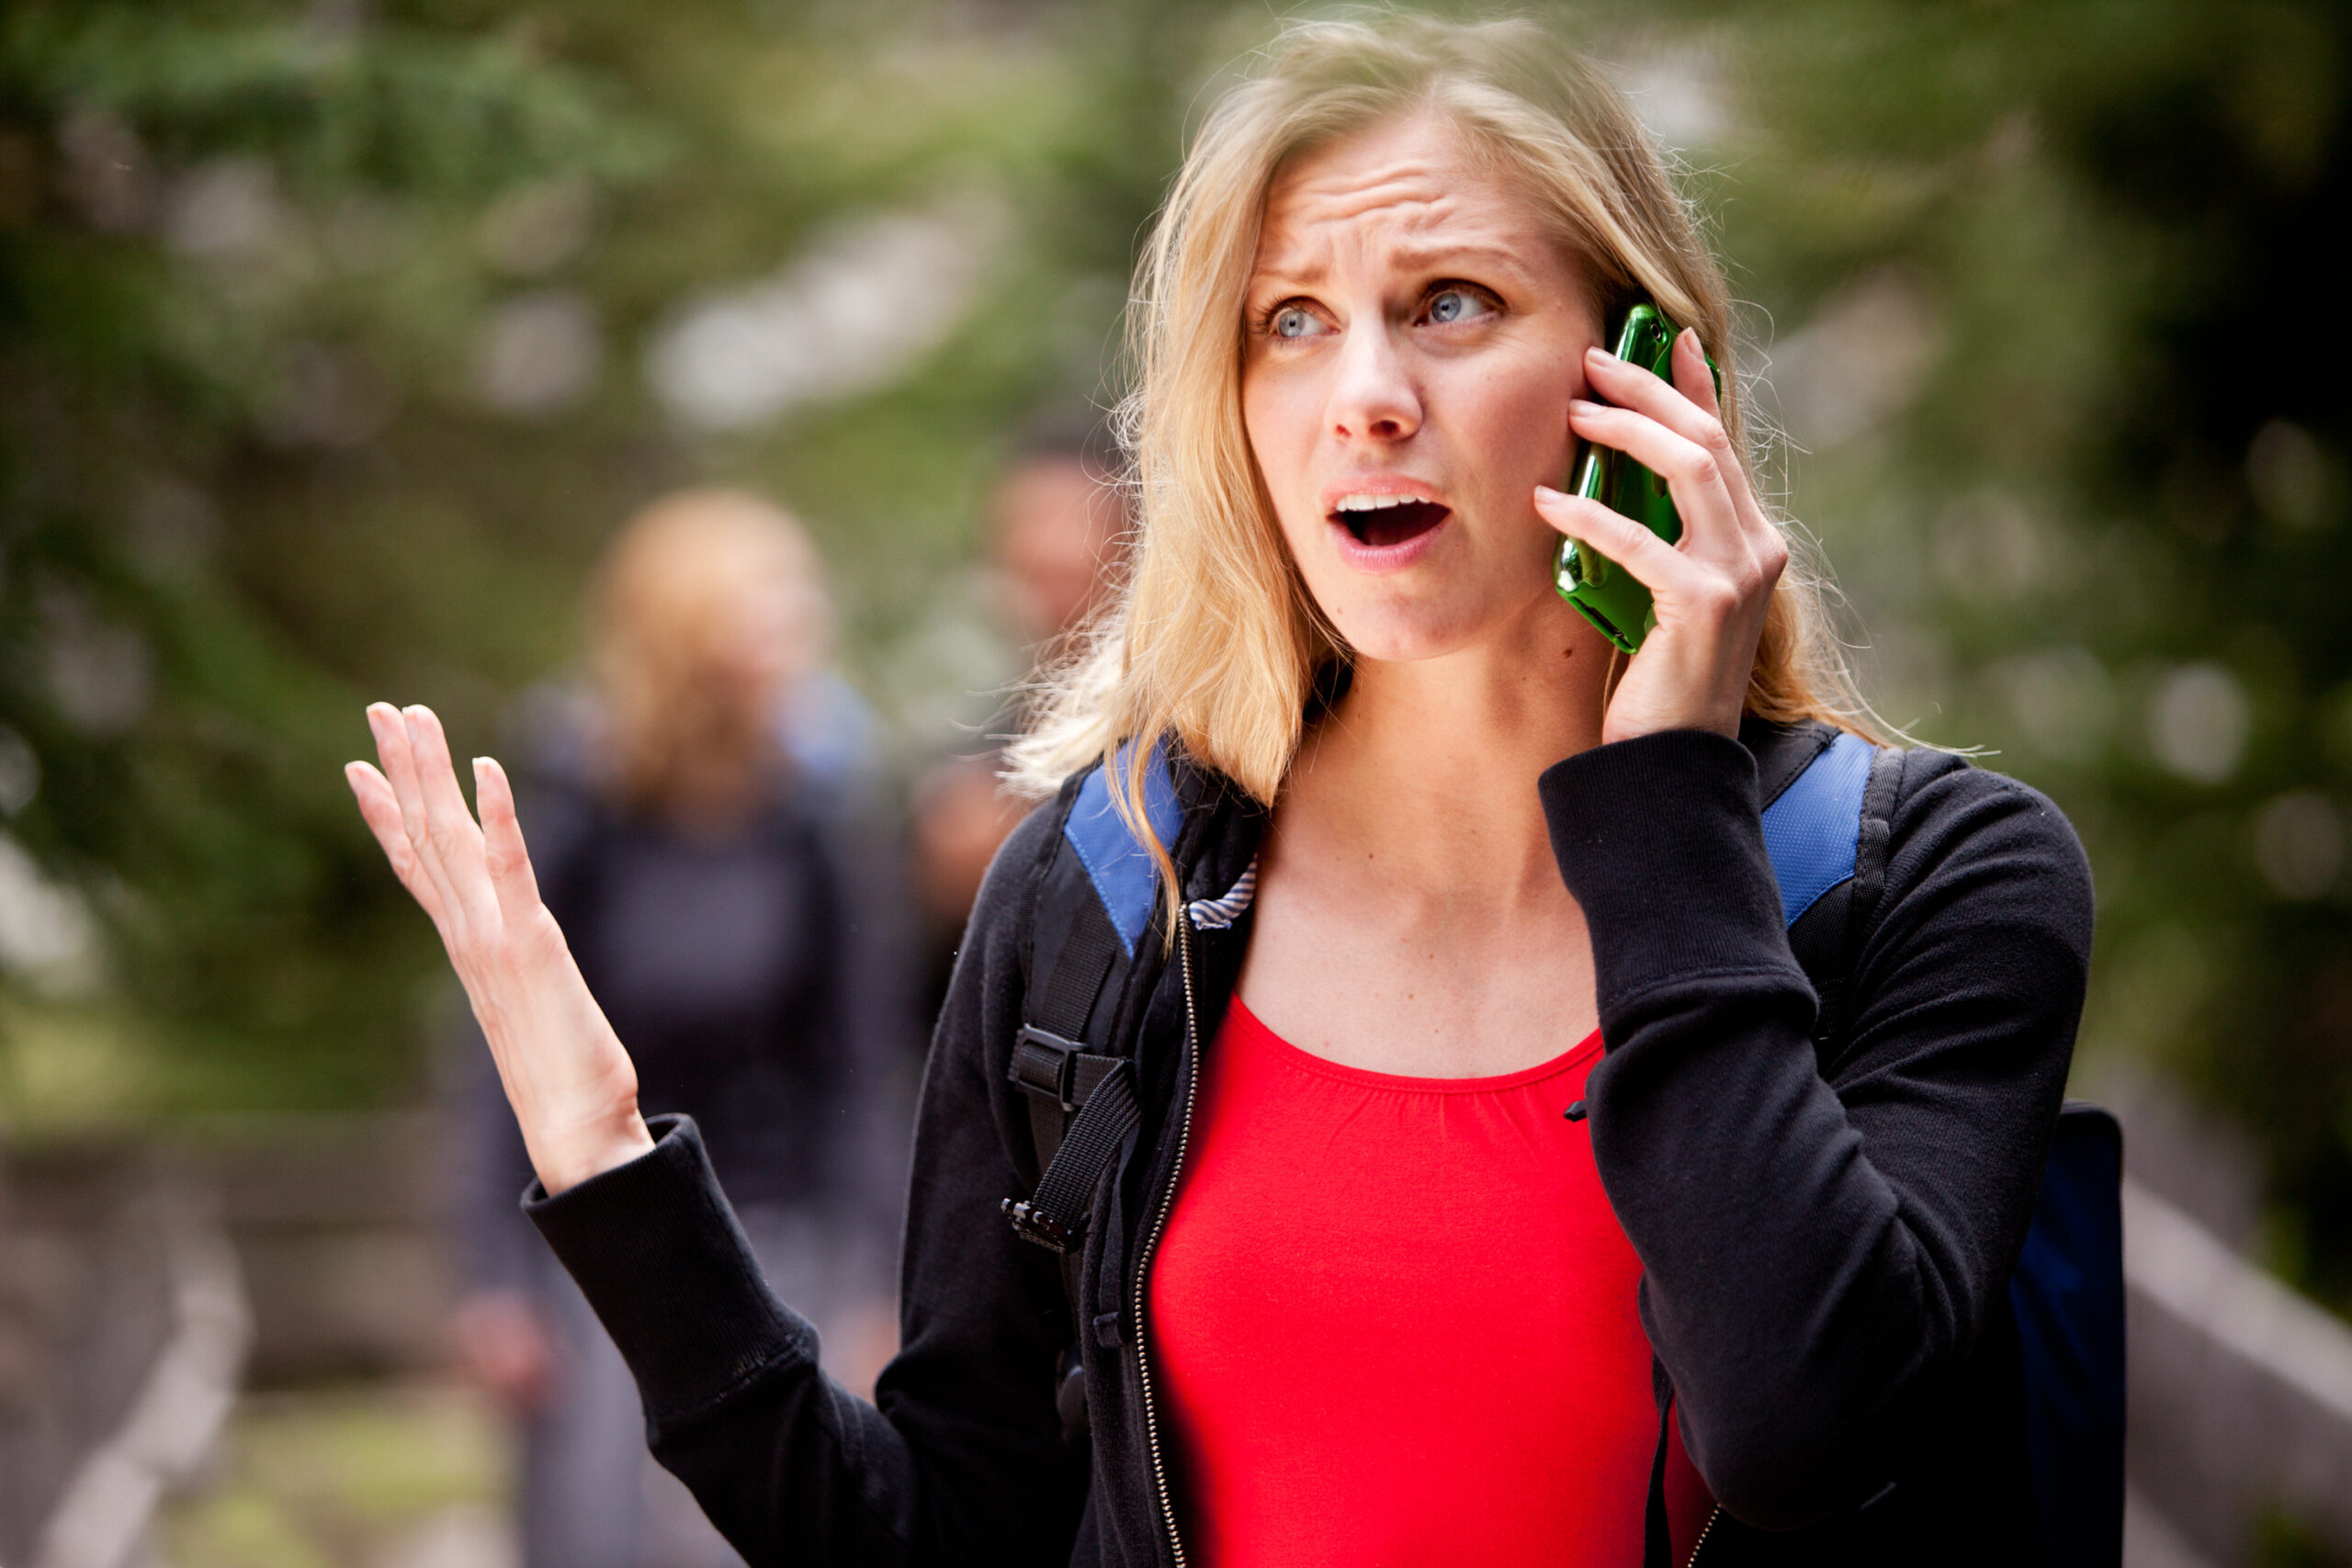 A woman talking on the phone, frustrated with the person she is talking to